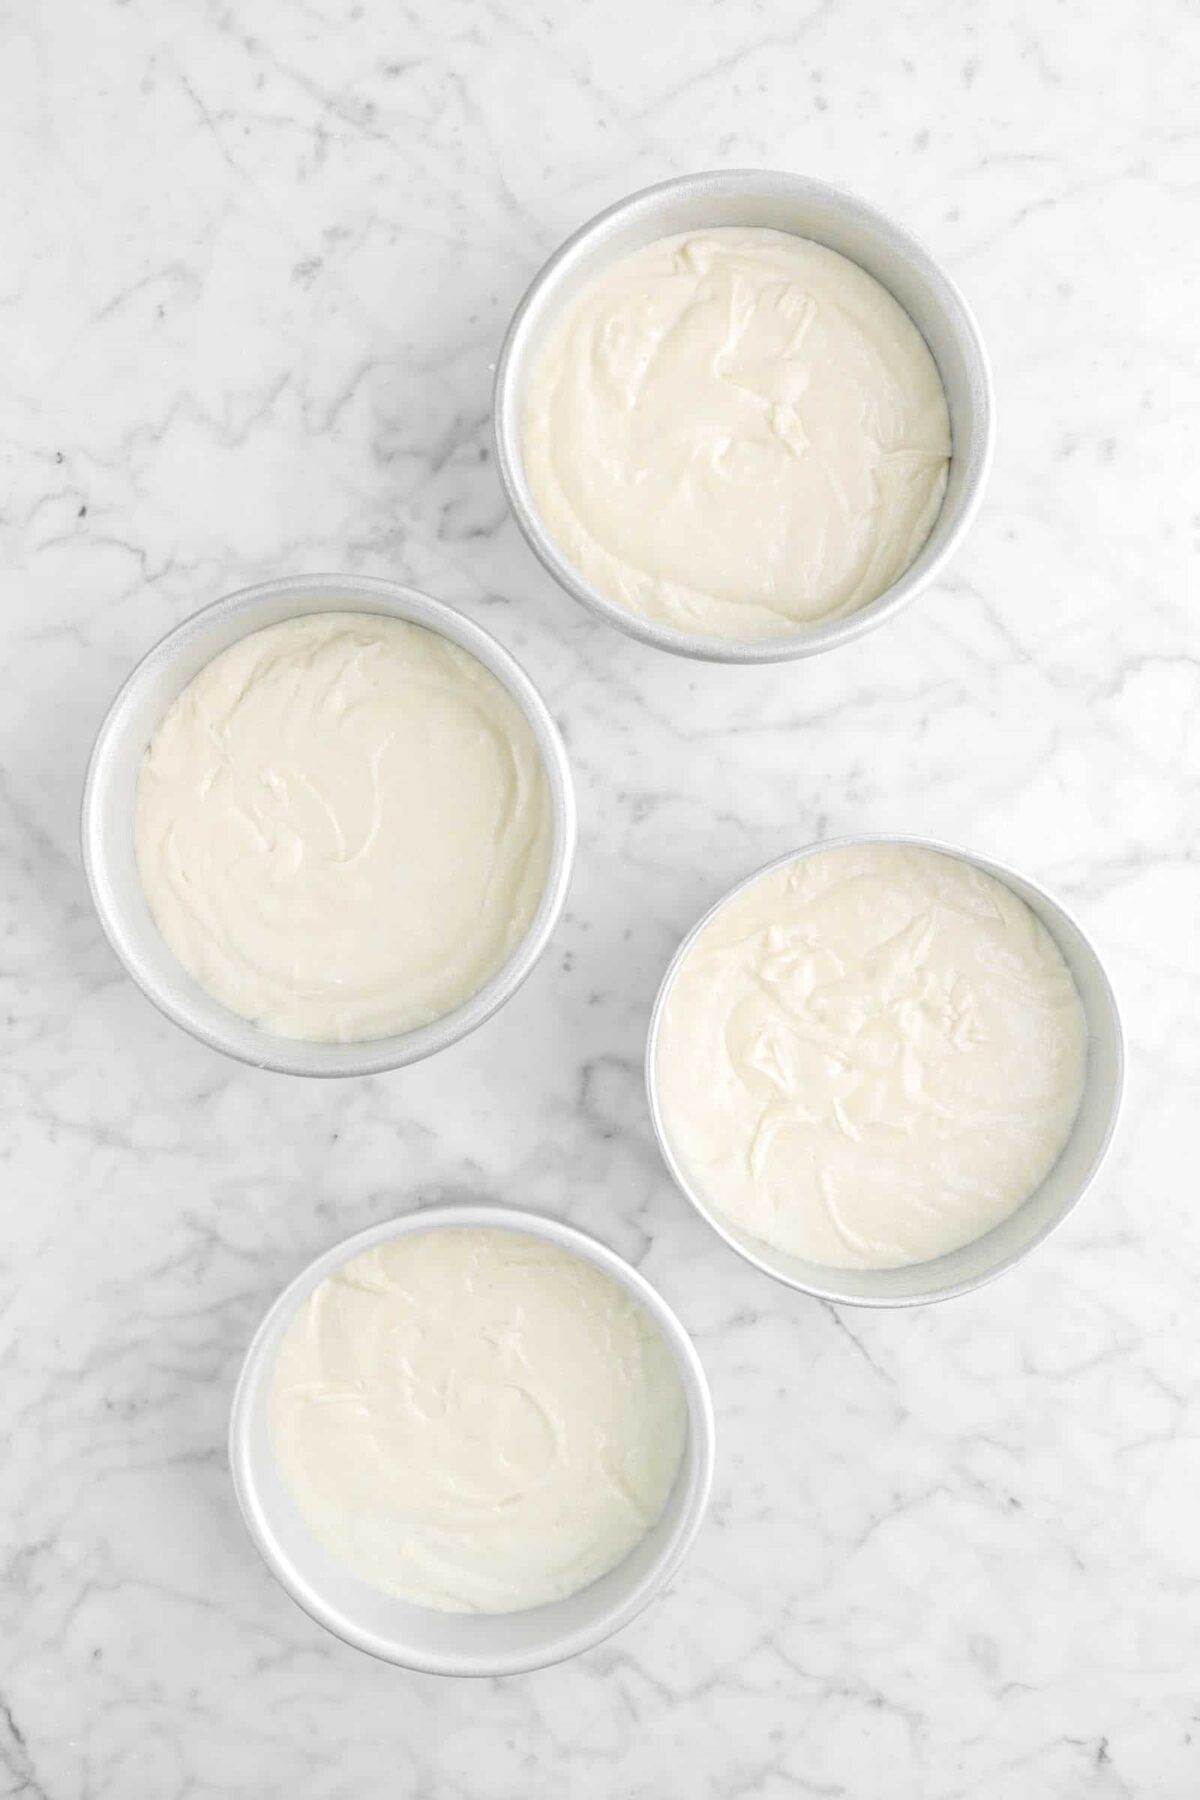 cake batter in four small round cake pans